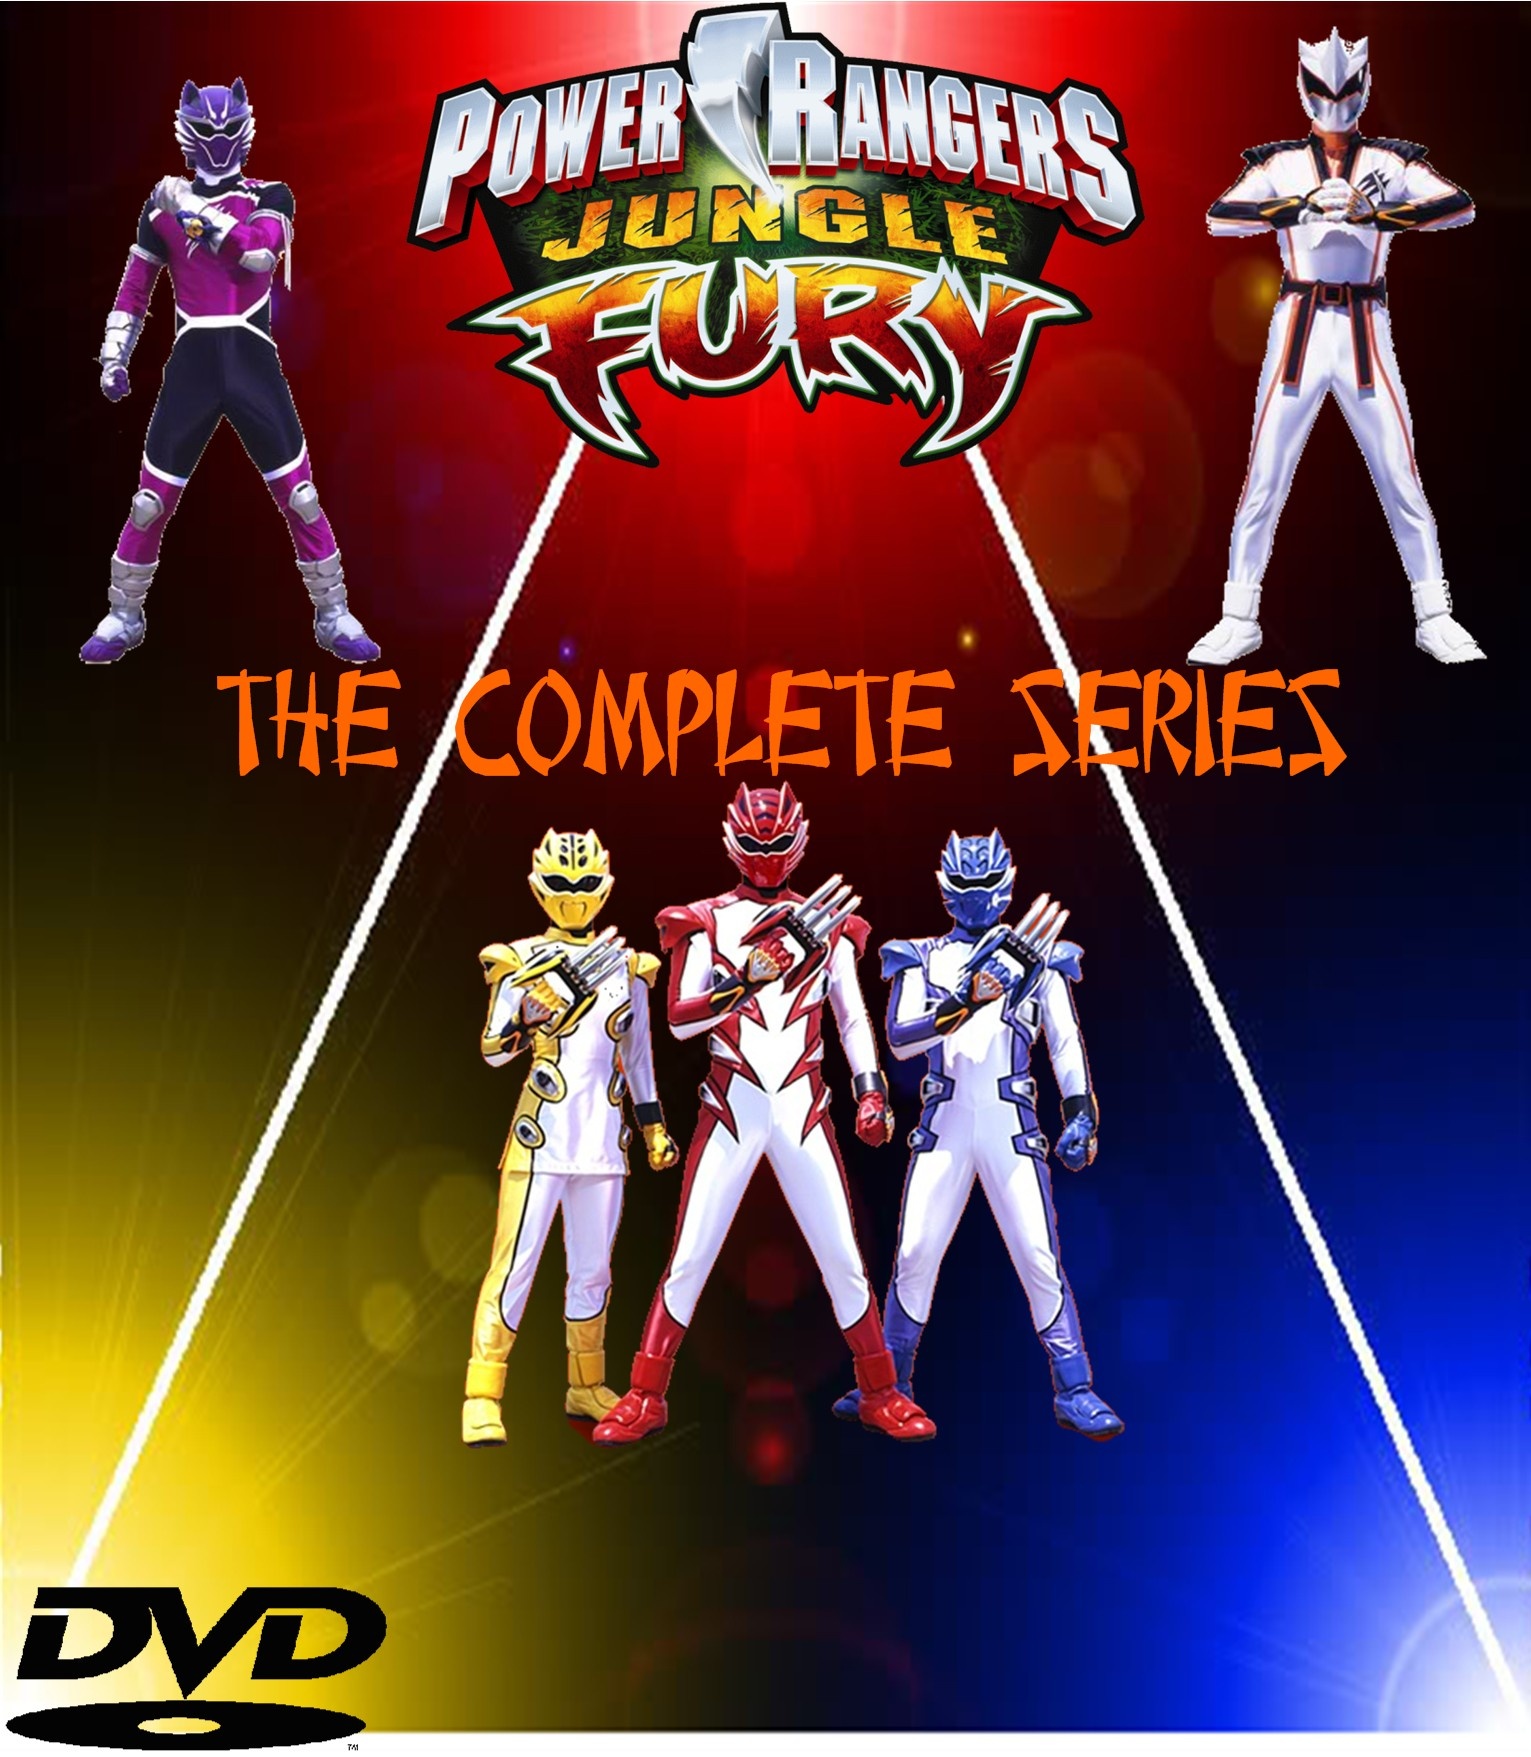 Power Rangers Jungle Fury The Complete Series box cover